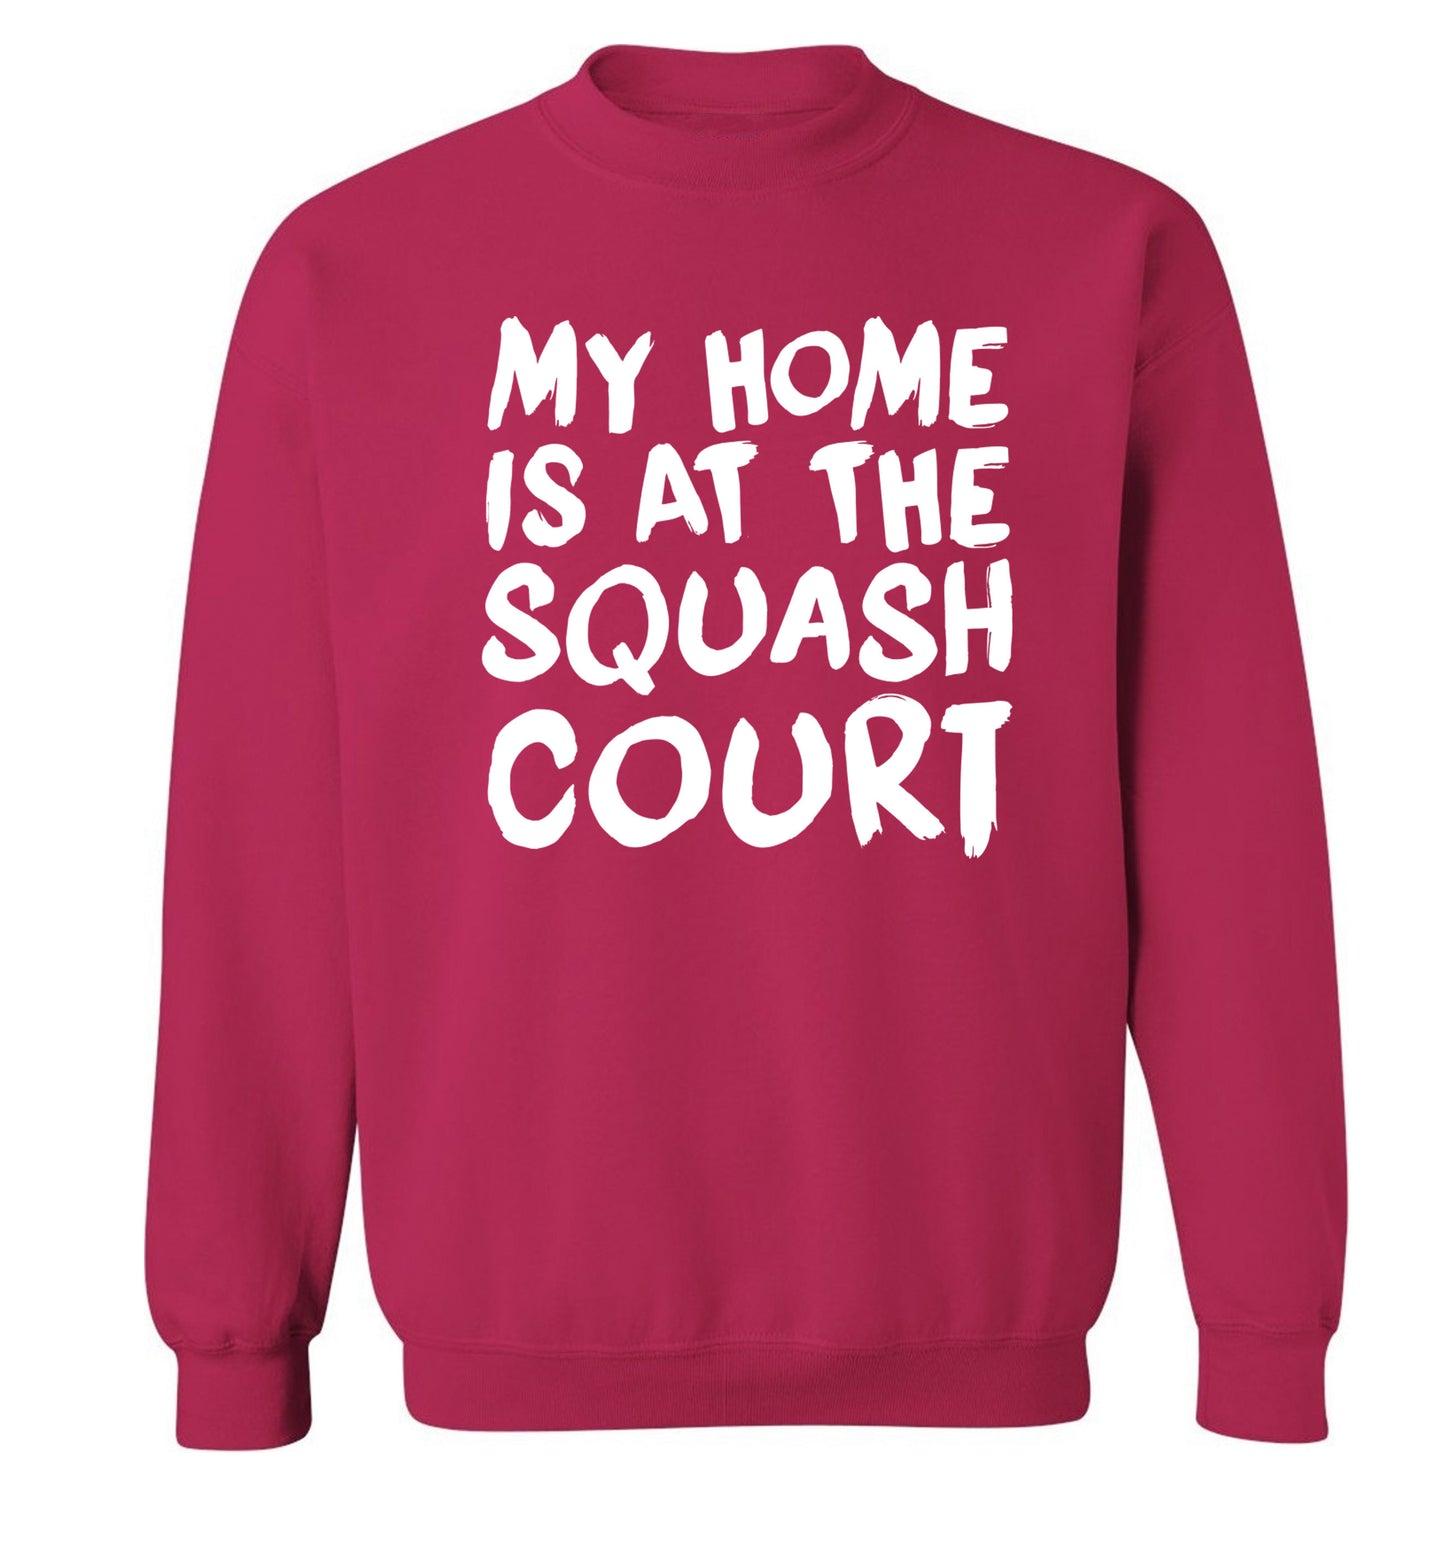 My home is at the squash court Adult's unisex pink Sweater 2XL